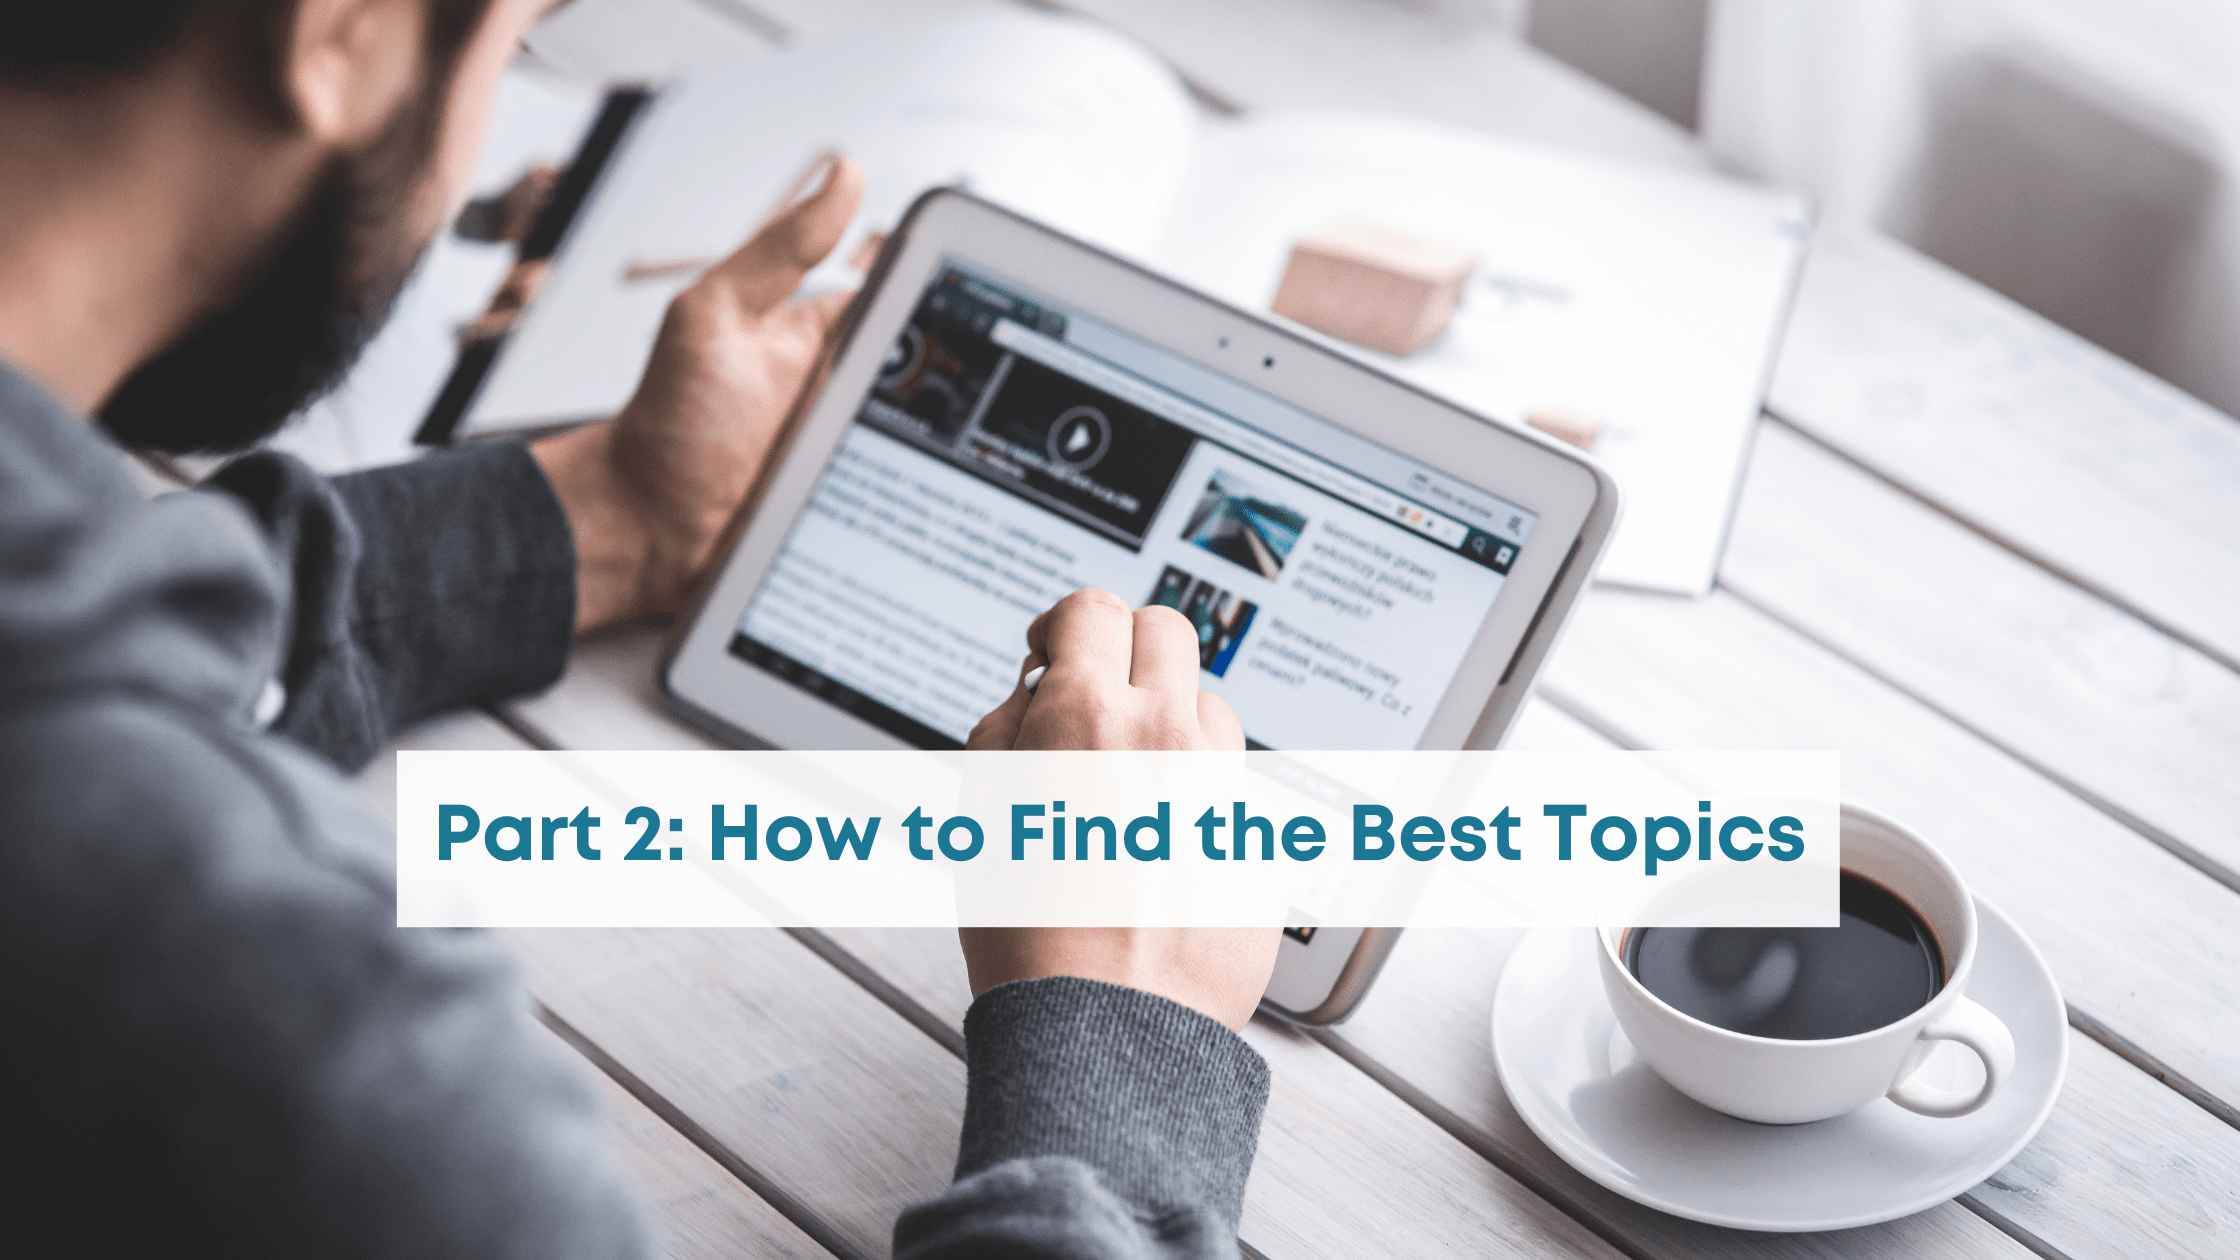 Blogging Tips - how to find the best topics to write